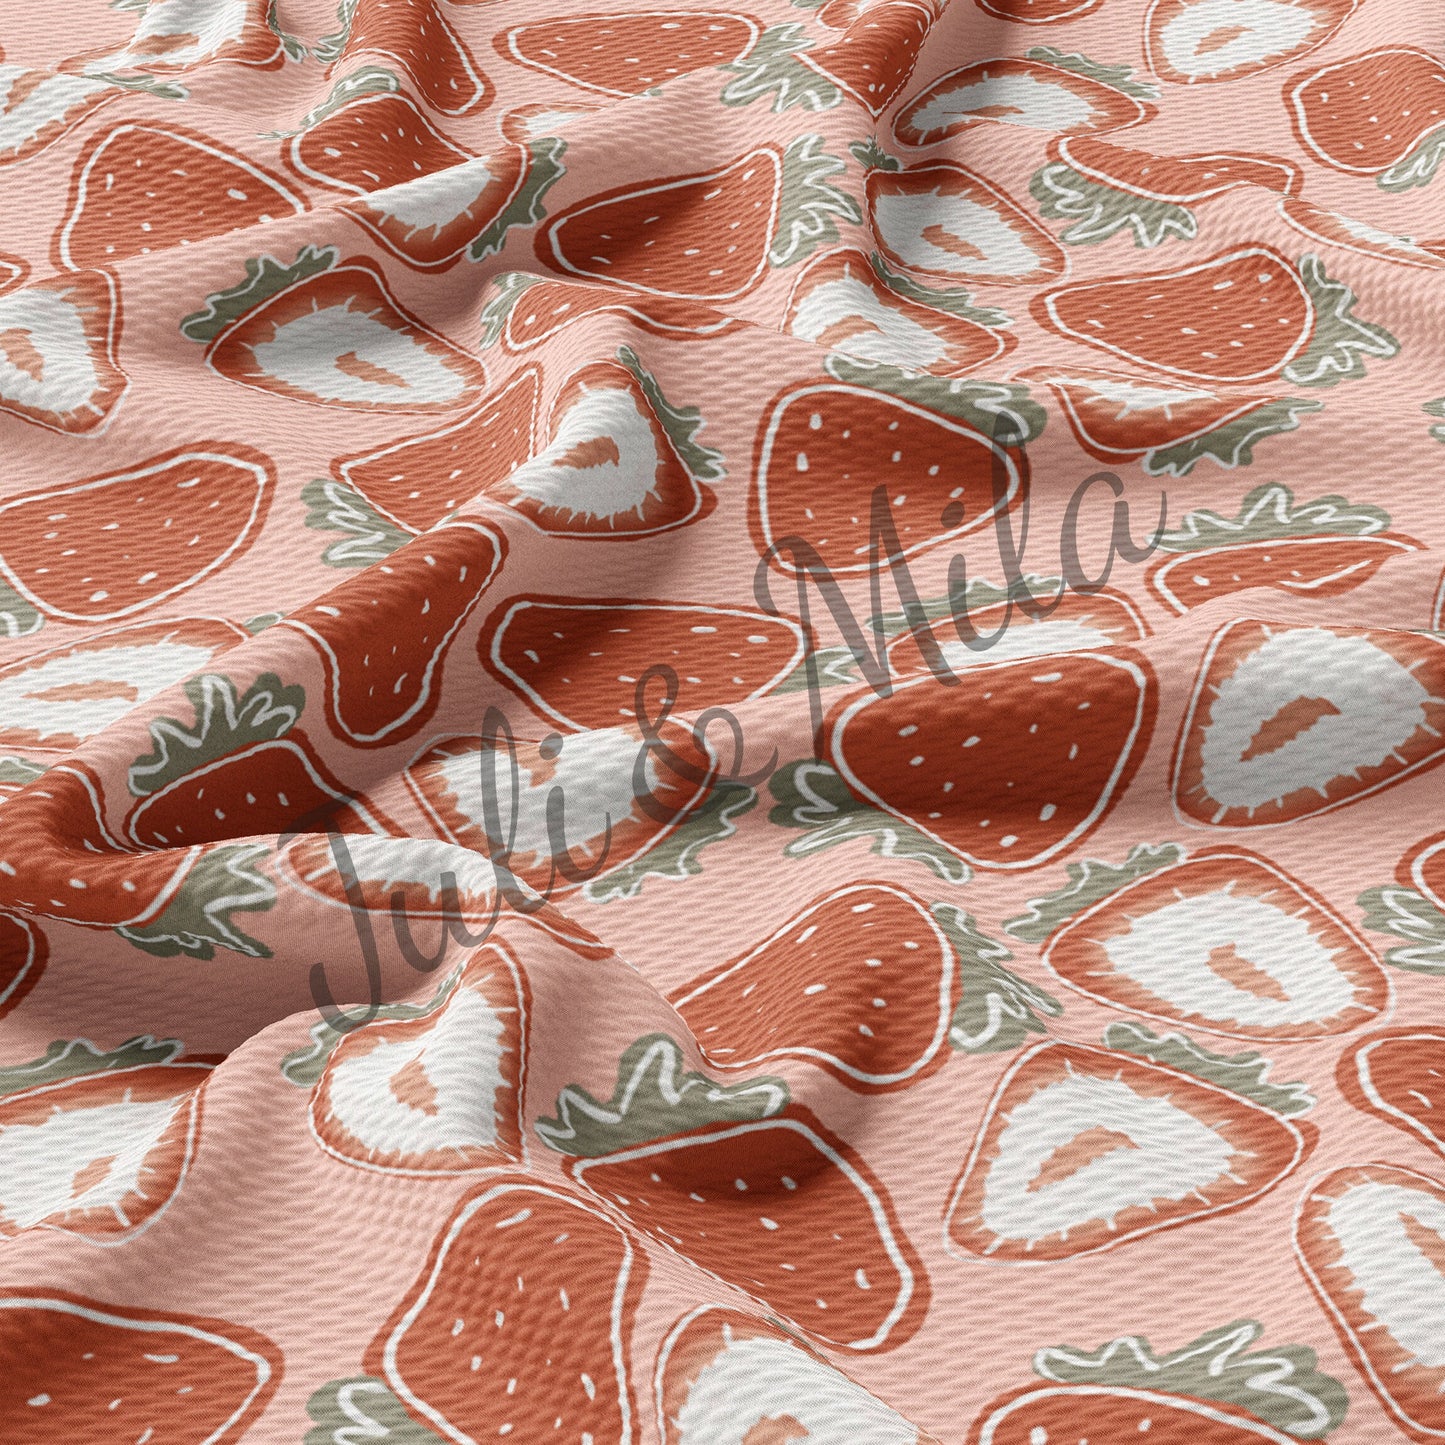 Strawberry Printed Liverpool Bullet Textured Fabric by the yard 4 Way Stretch Solid Strip Thick Knit Jersey Liverpool Fabric Strawberry2